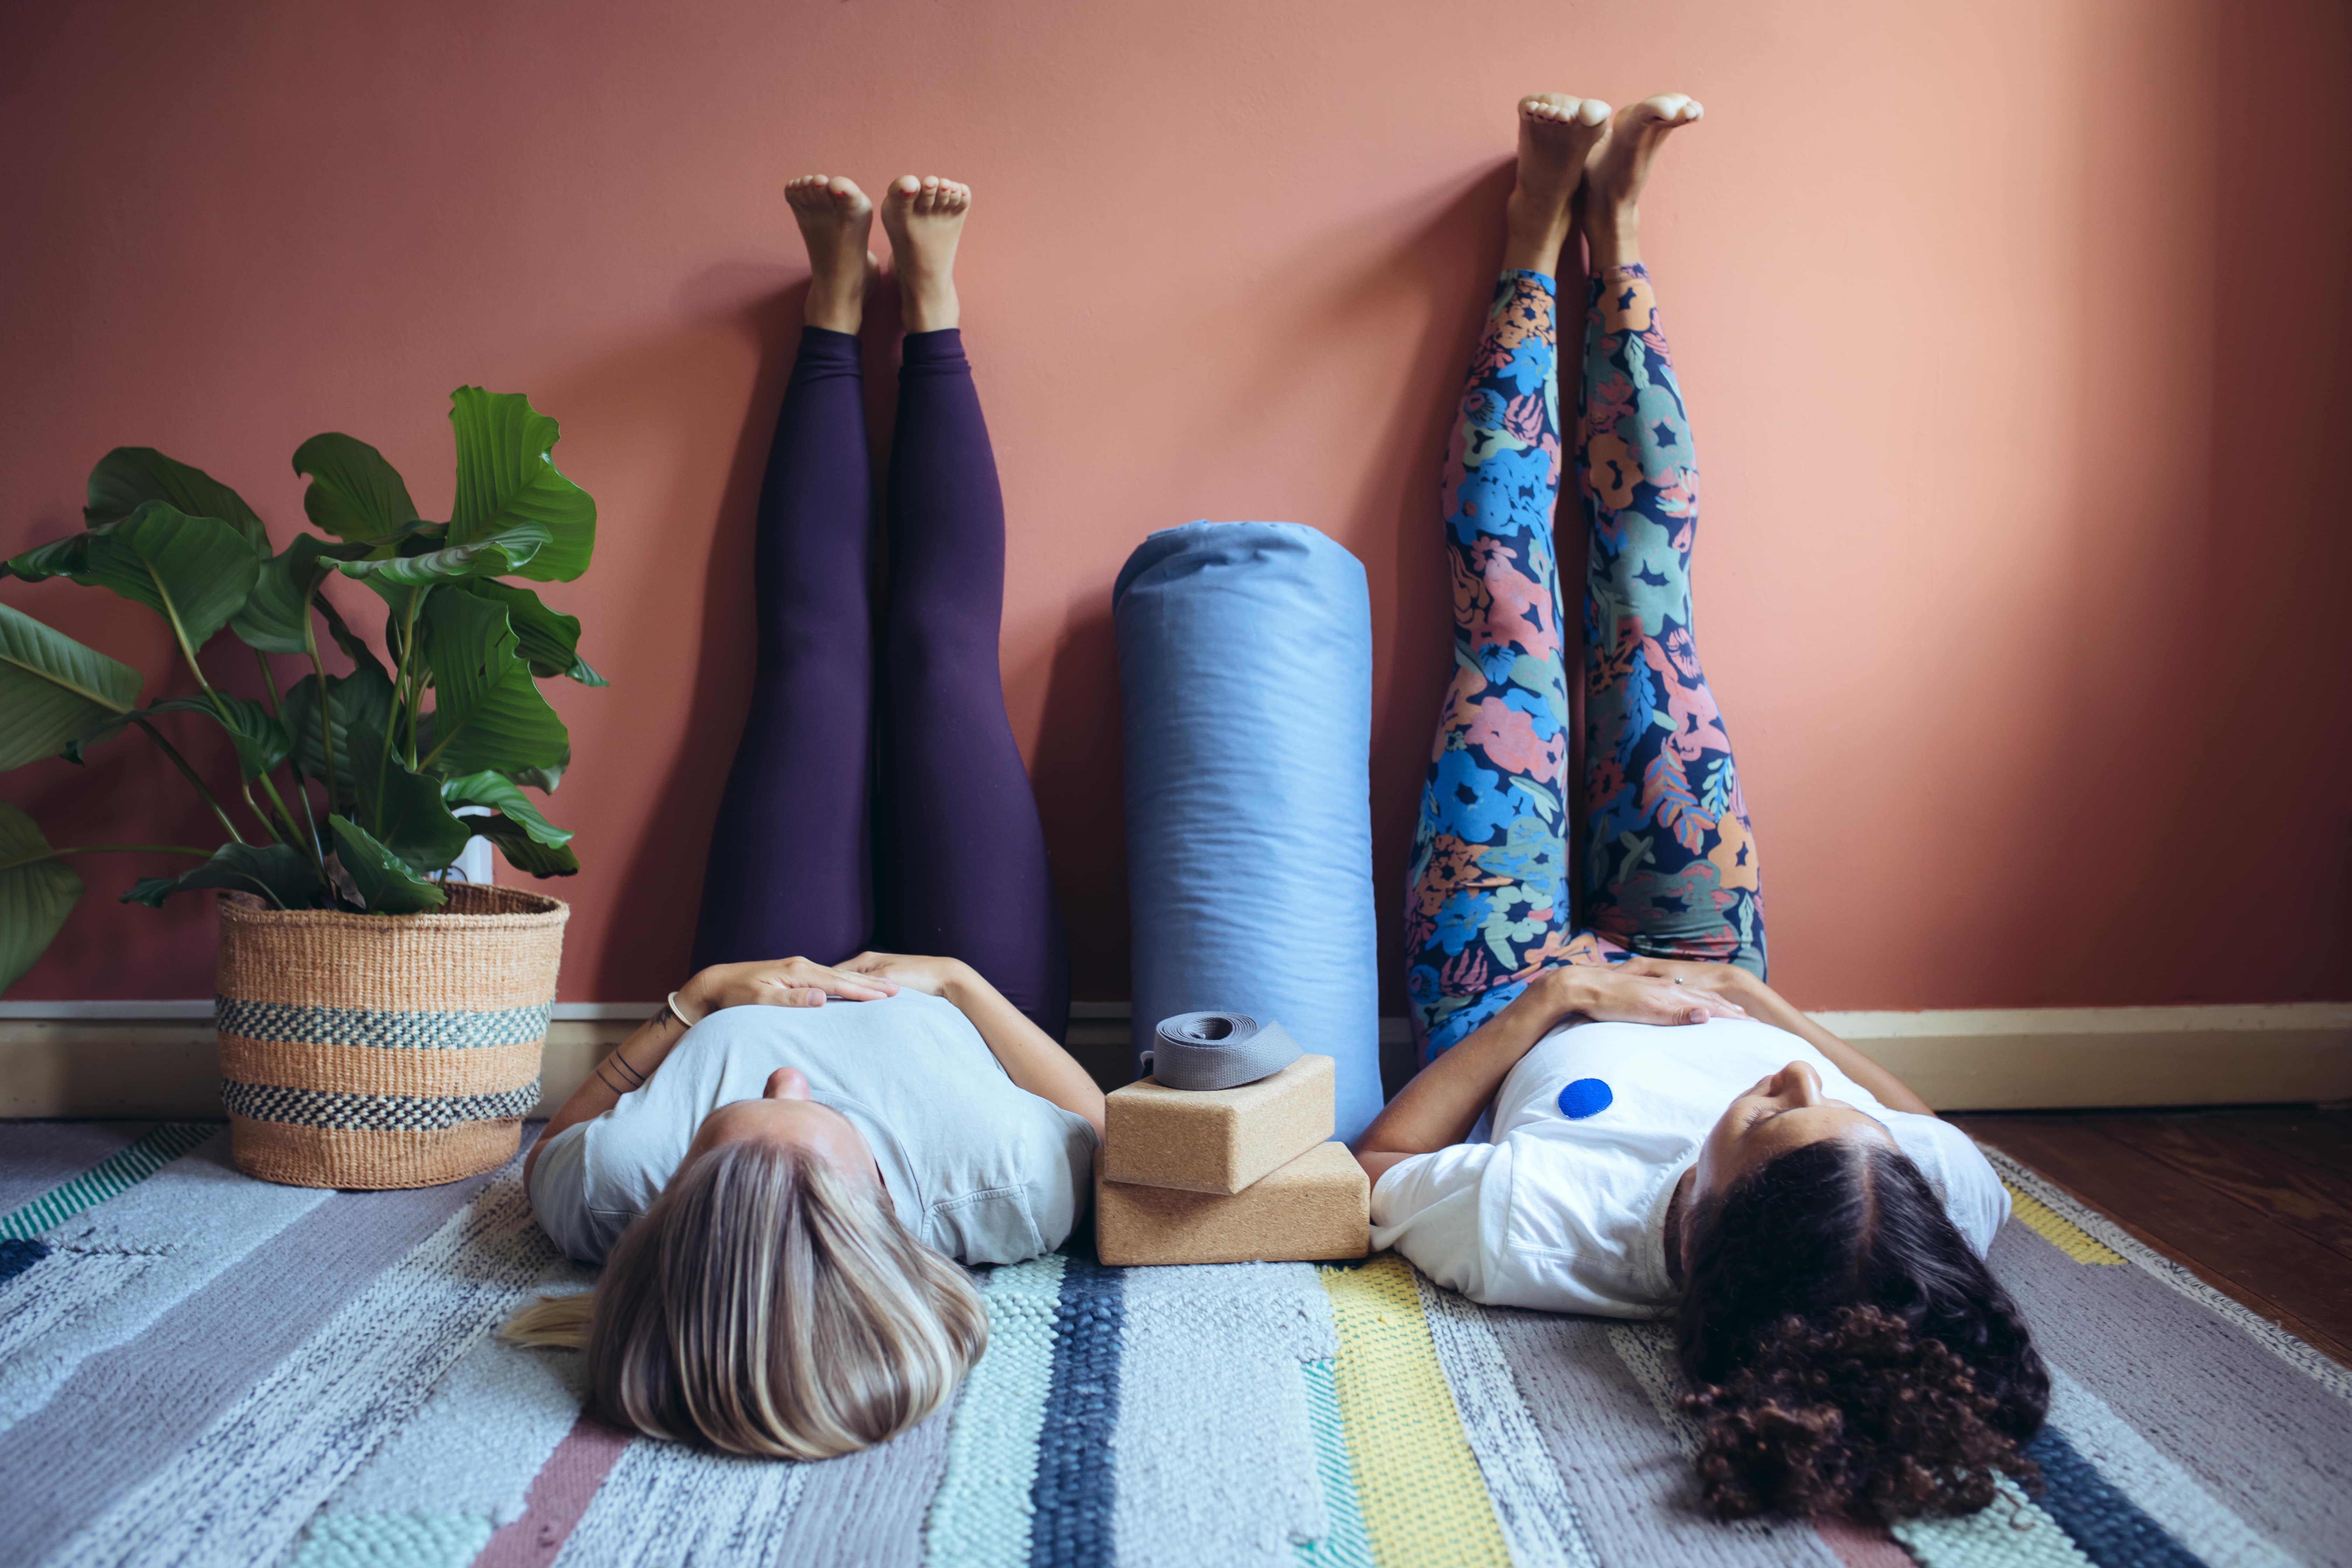 Two ladies practicing the legs up the wall yoga pose side by side. The wall is a burnt orange colour and the ladies are lying on a multicoloured striped rug